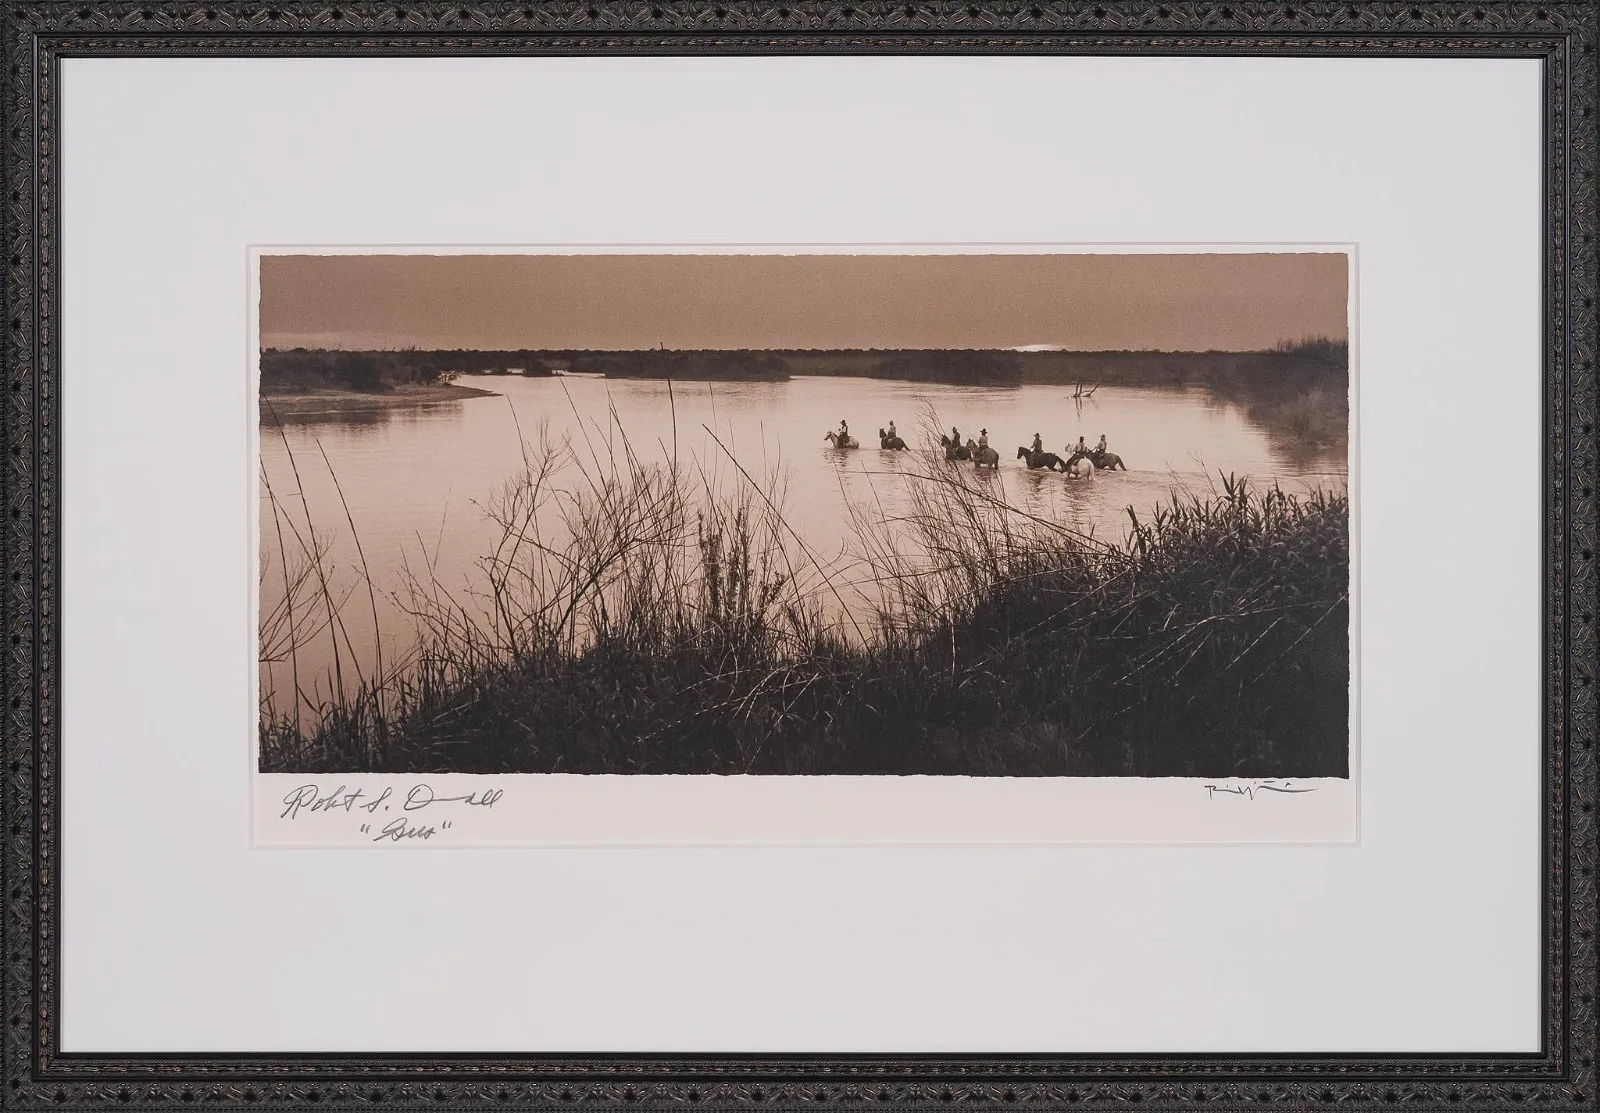 Bill Wittliff, Crossing the Rio Grande, $27,500 ($34,375 with buyer’s premium) at Vogt Auction.